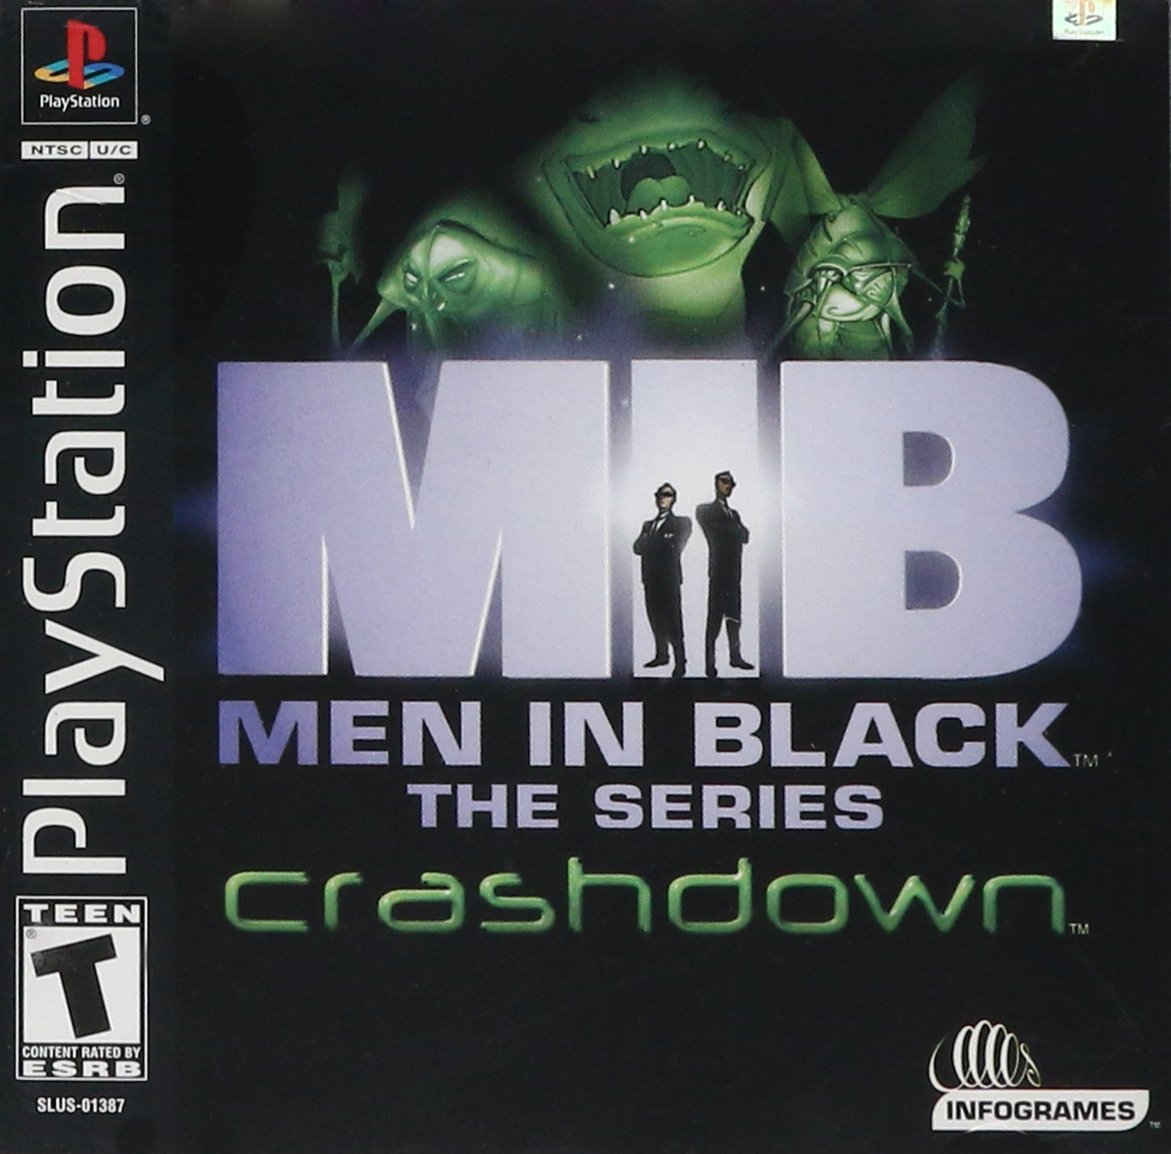 Men in Black: The Series – Crashdown player count stats